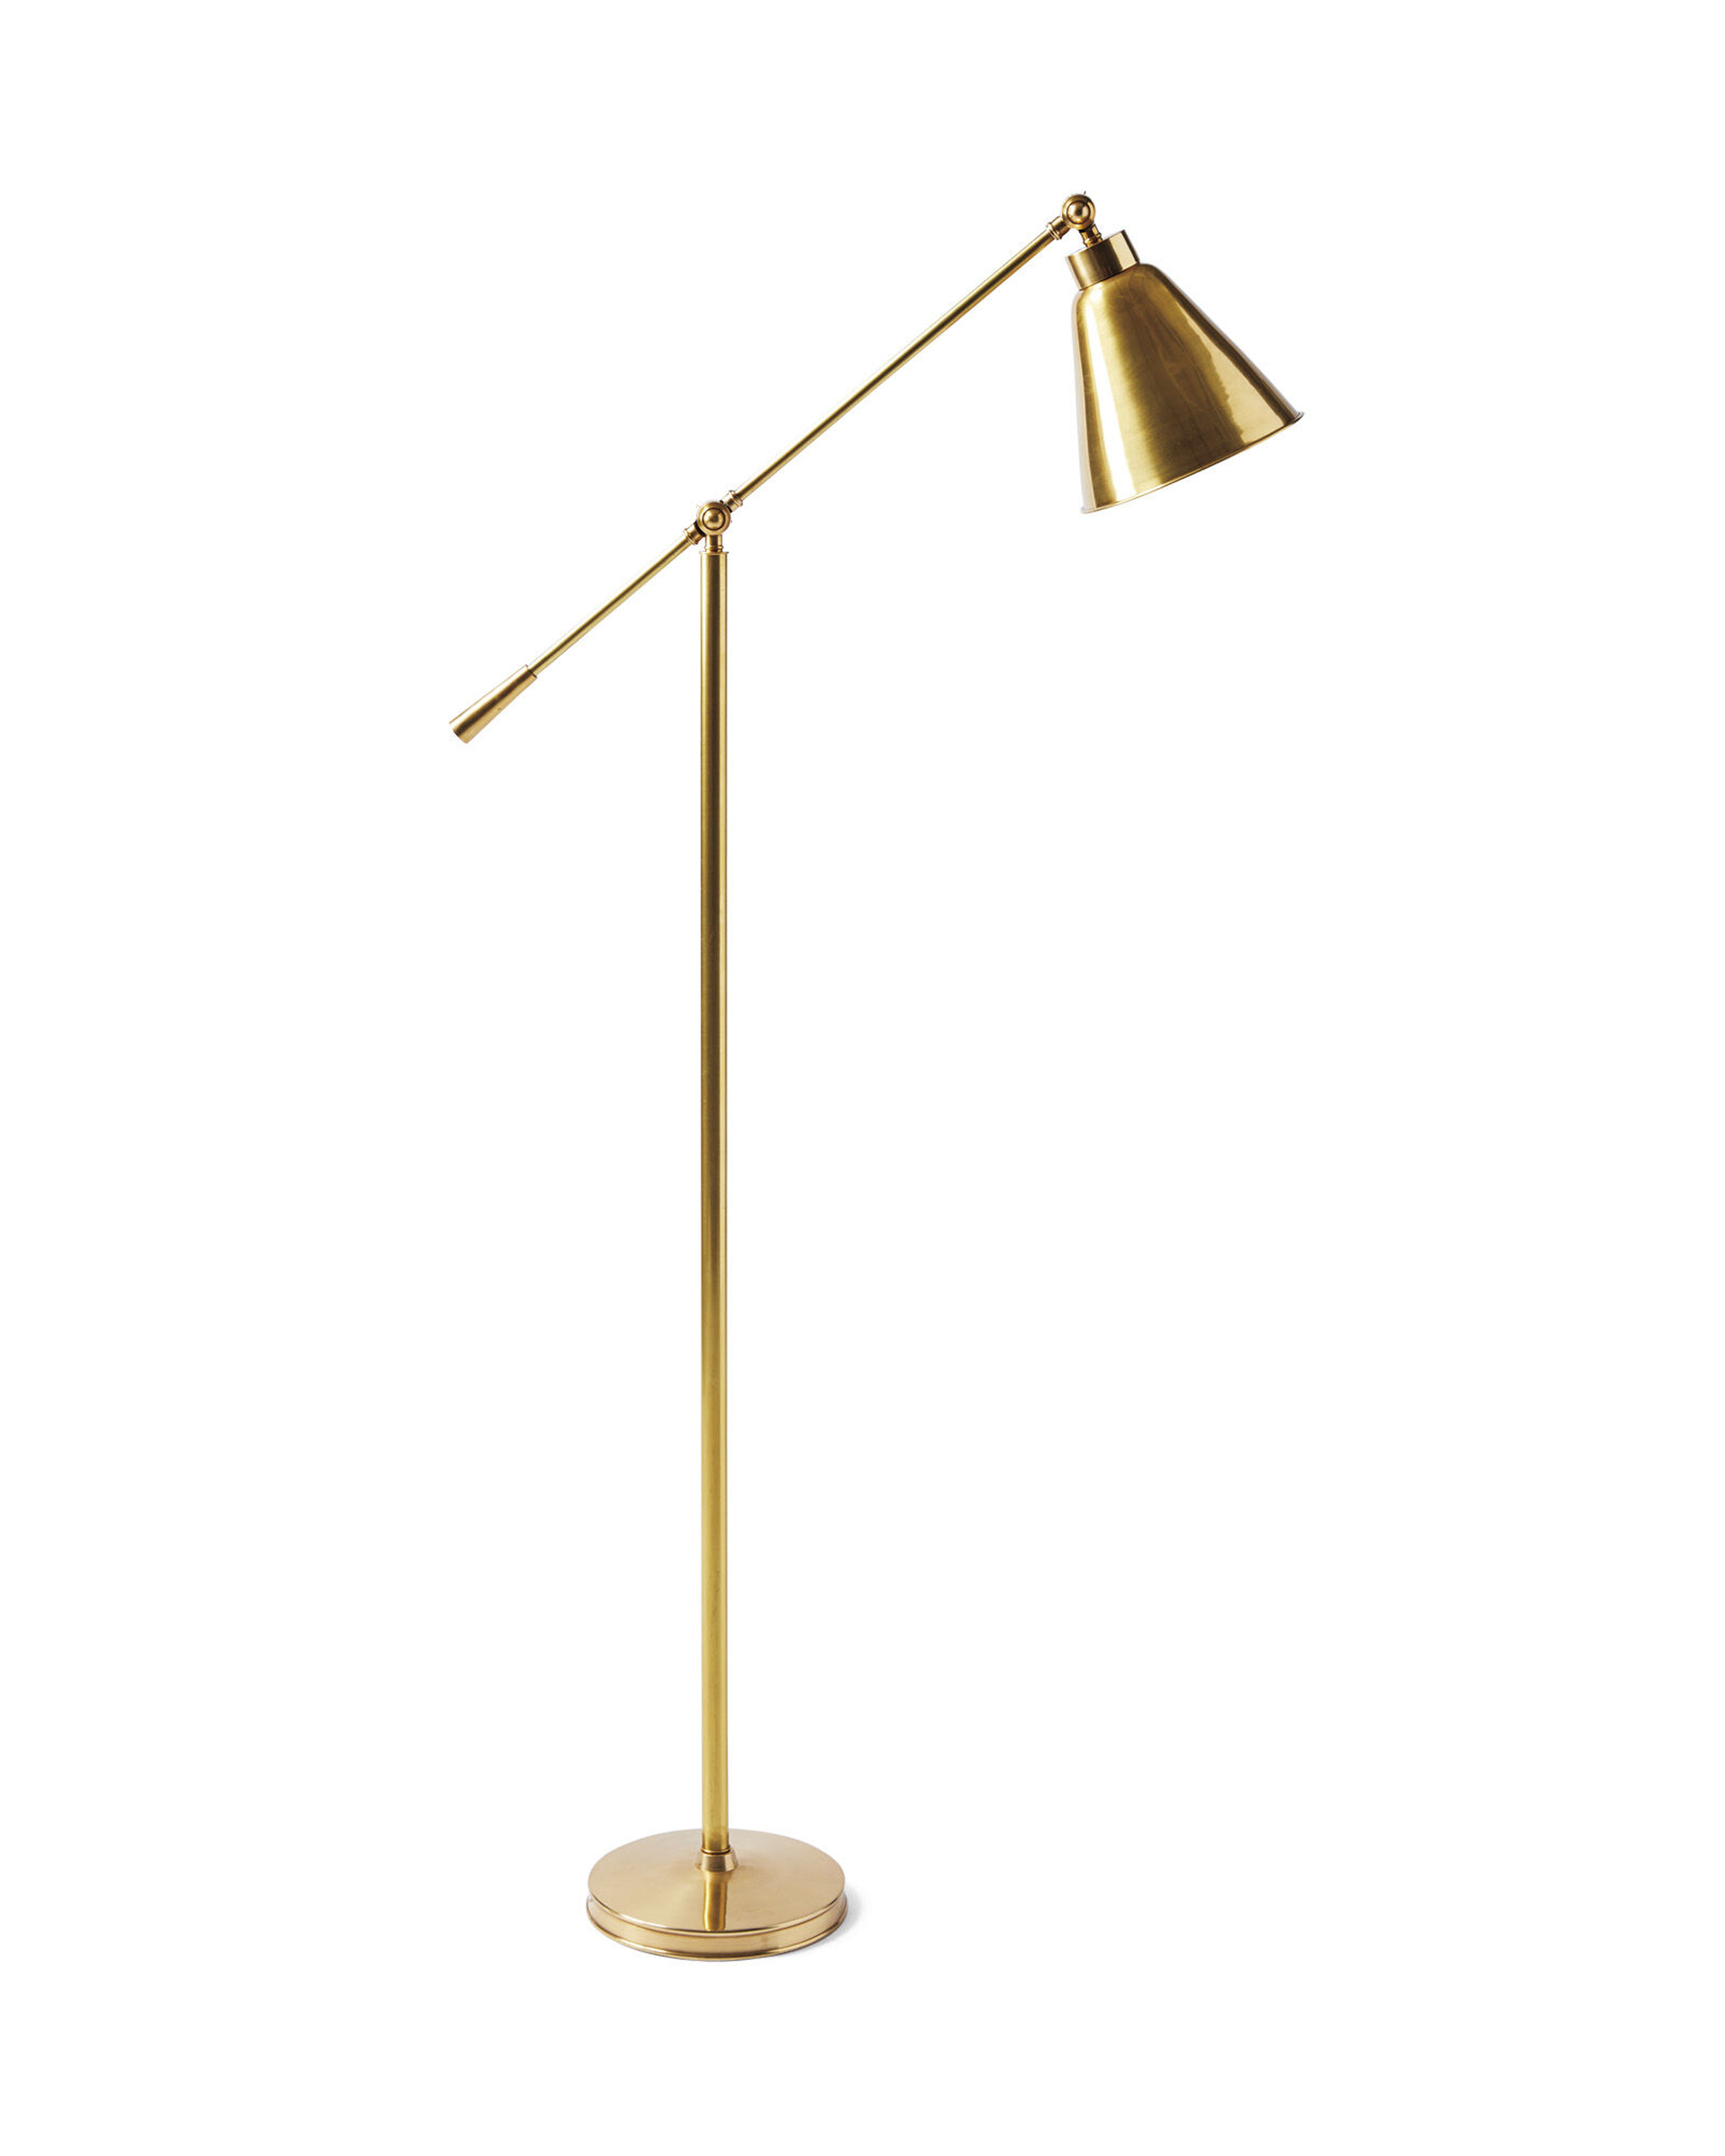 Claremont Floor Lamp - Serena and Lily